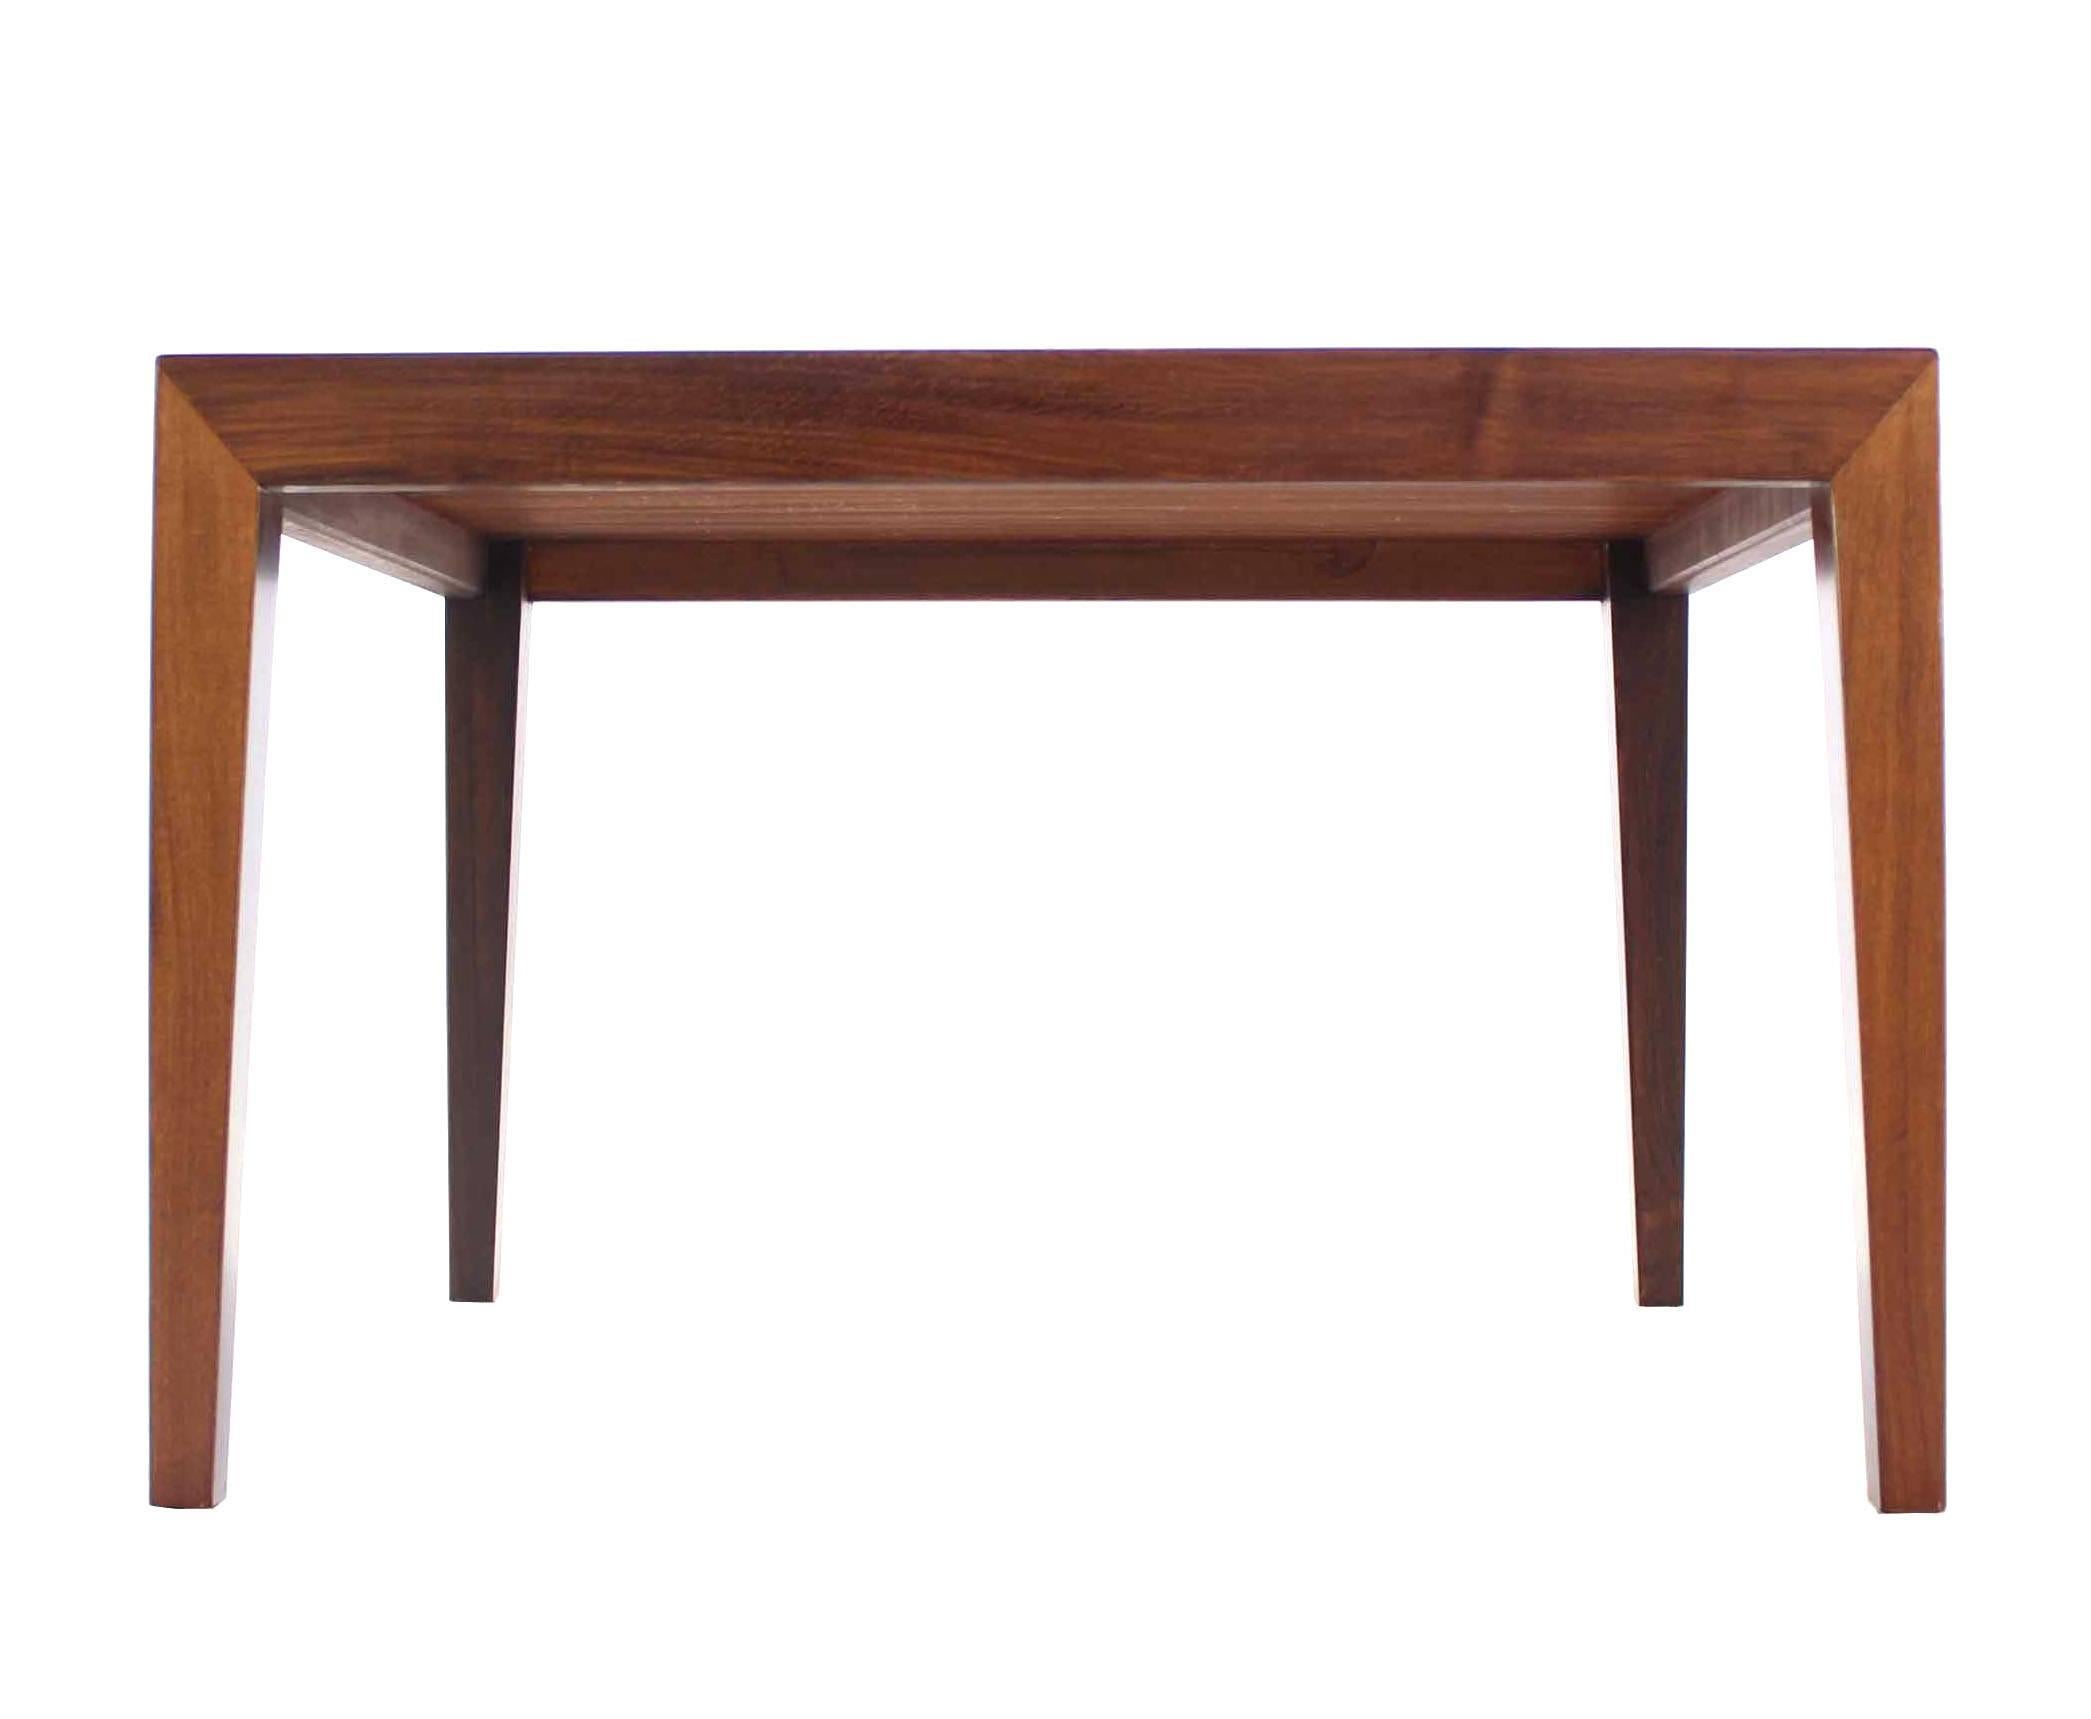 American Danish Modern Square Rosewood Coffee Table with Tiled Top   For Sale